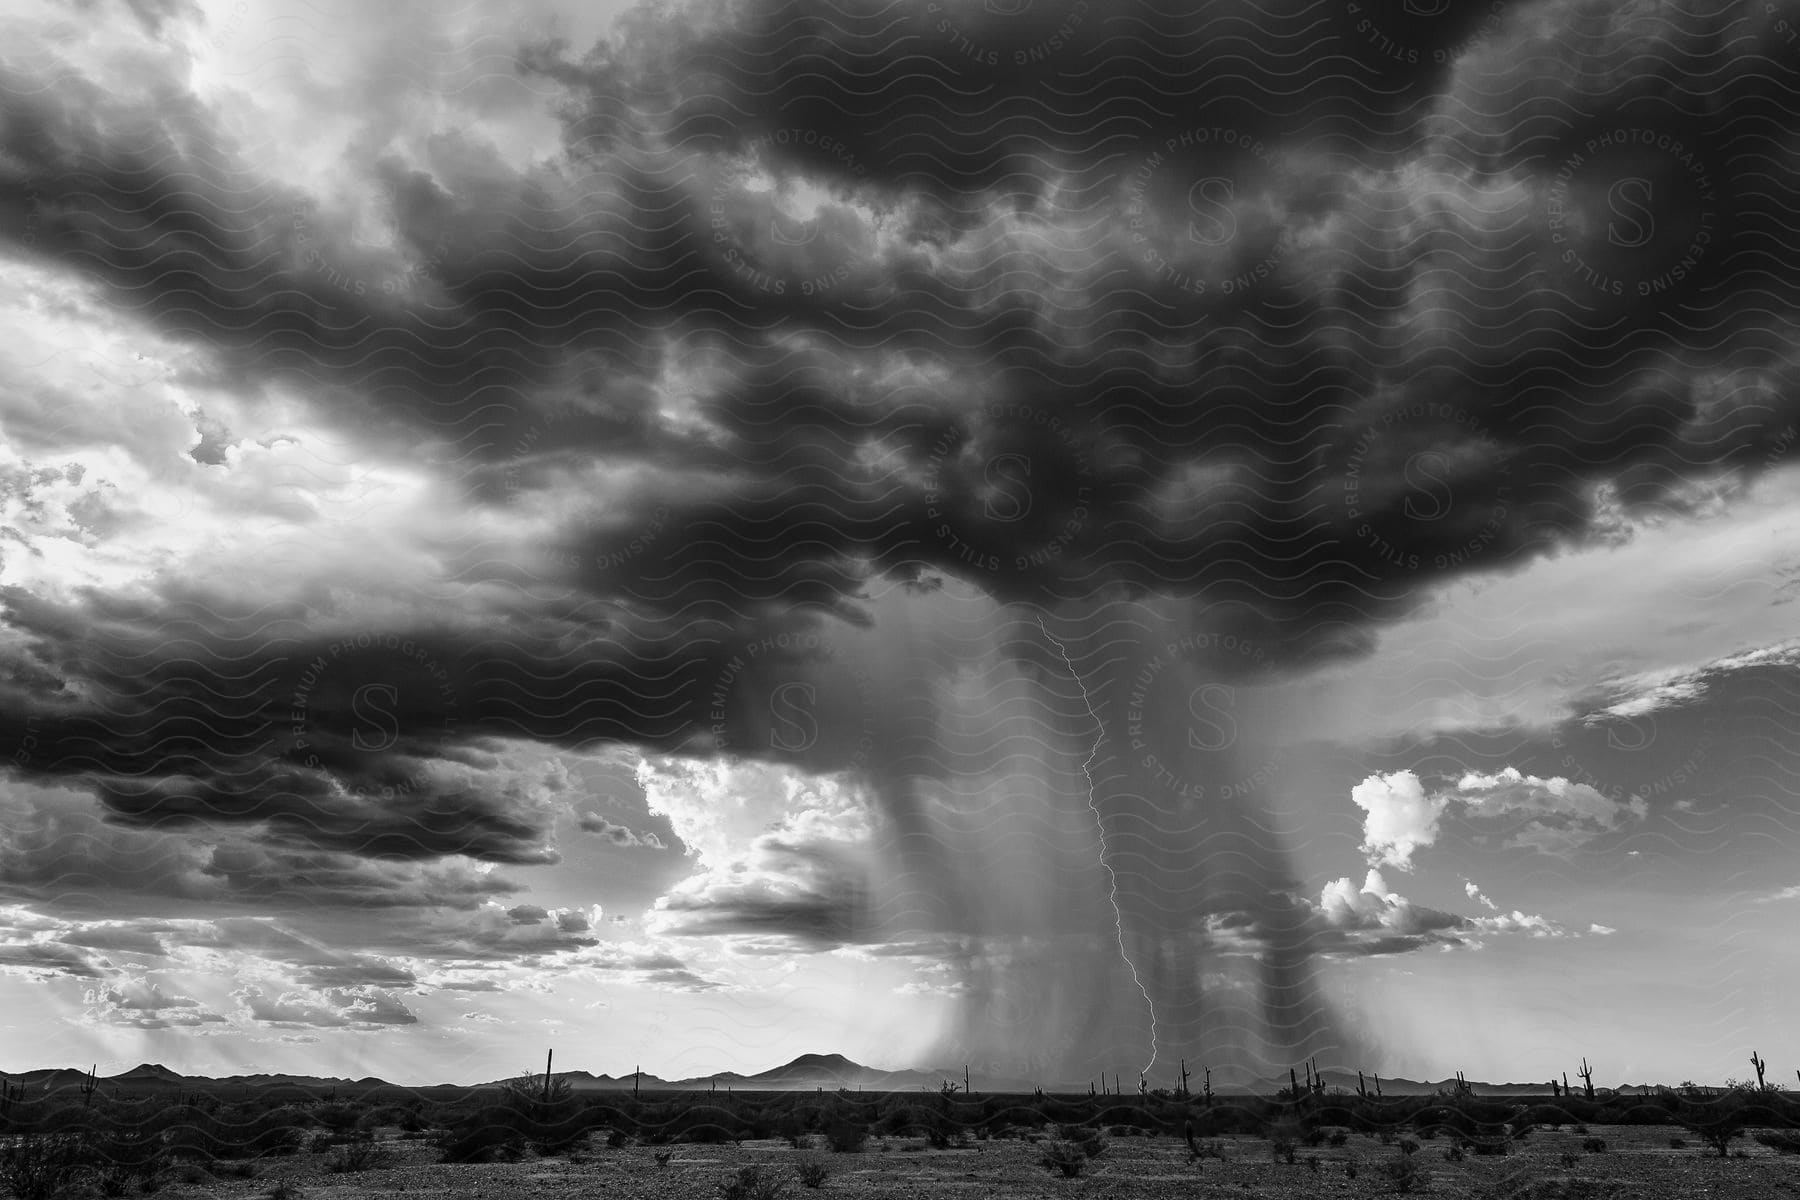 A dark storm cloud pours rain over the desert as lightning strikes the ground